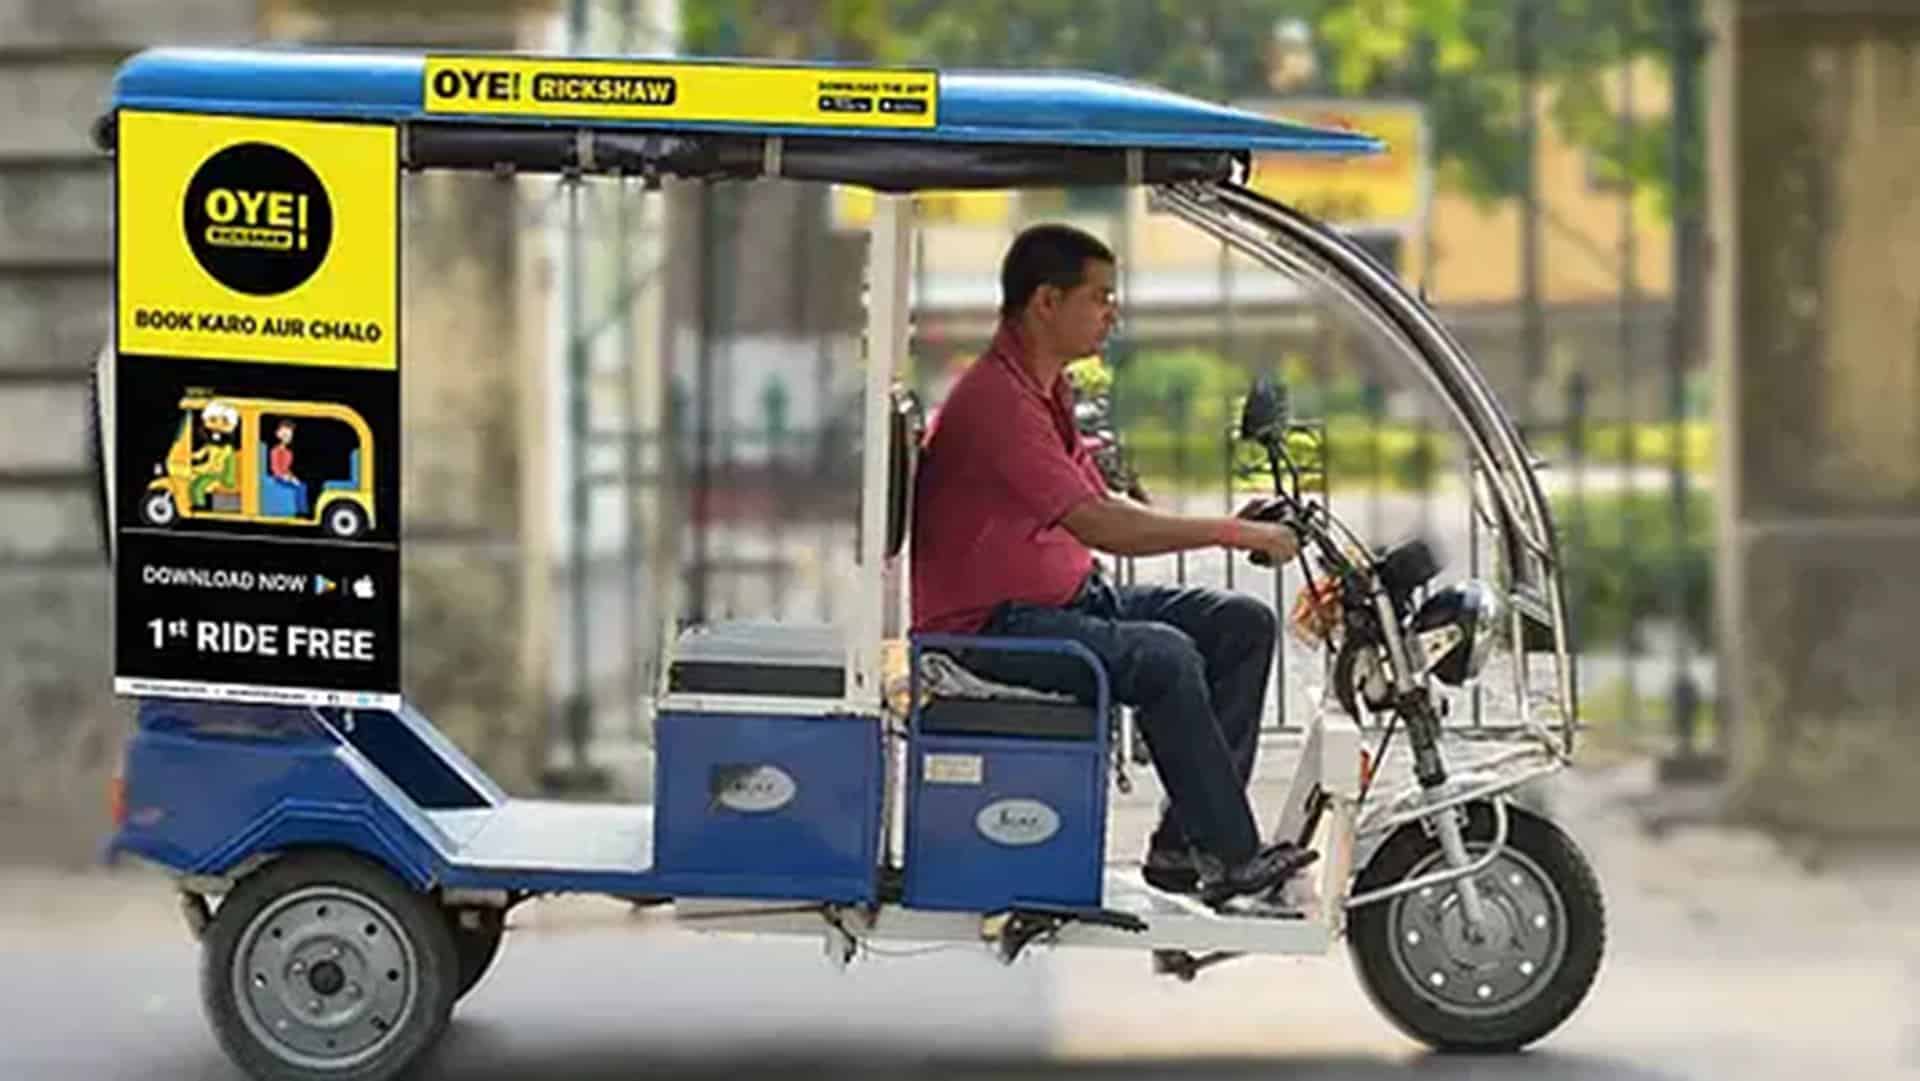 Oye! Rickshaw plans to invest up to USD 500 mn over 3 yrs on battery swapping infra